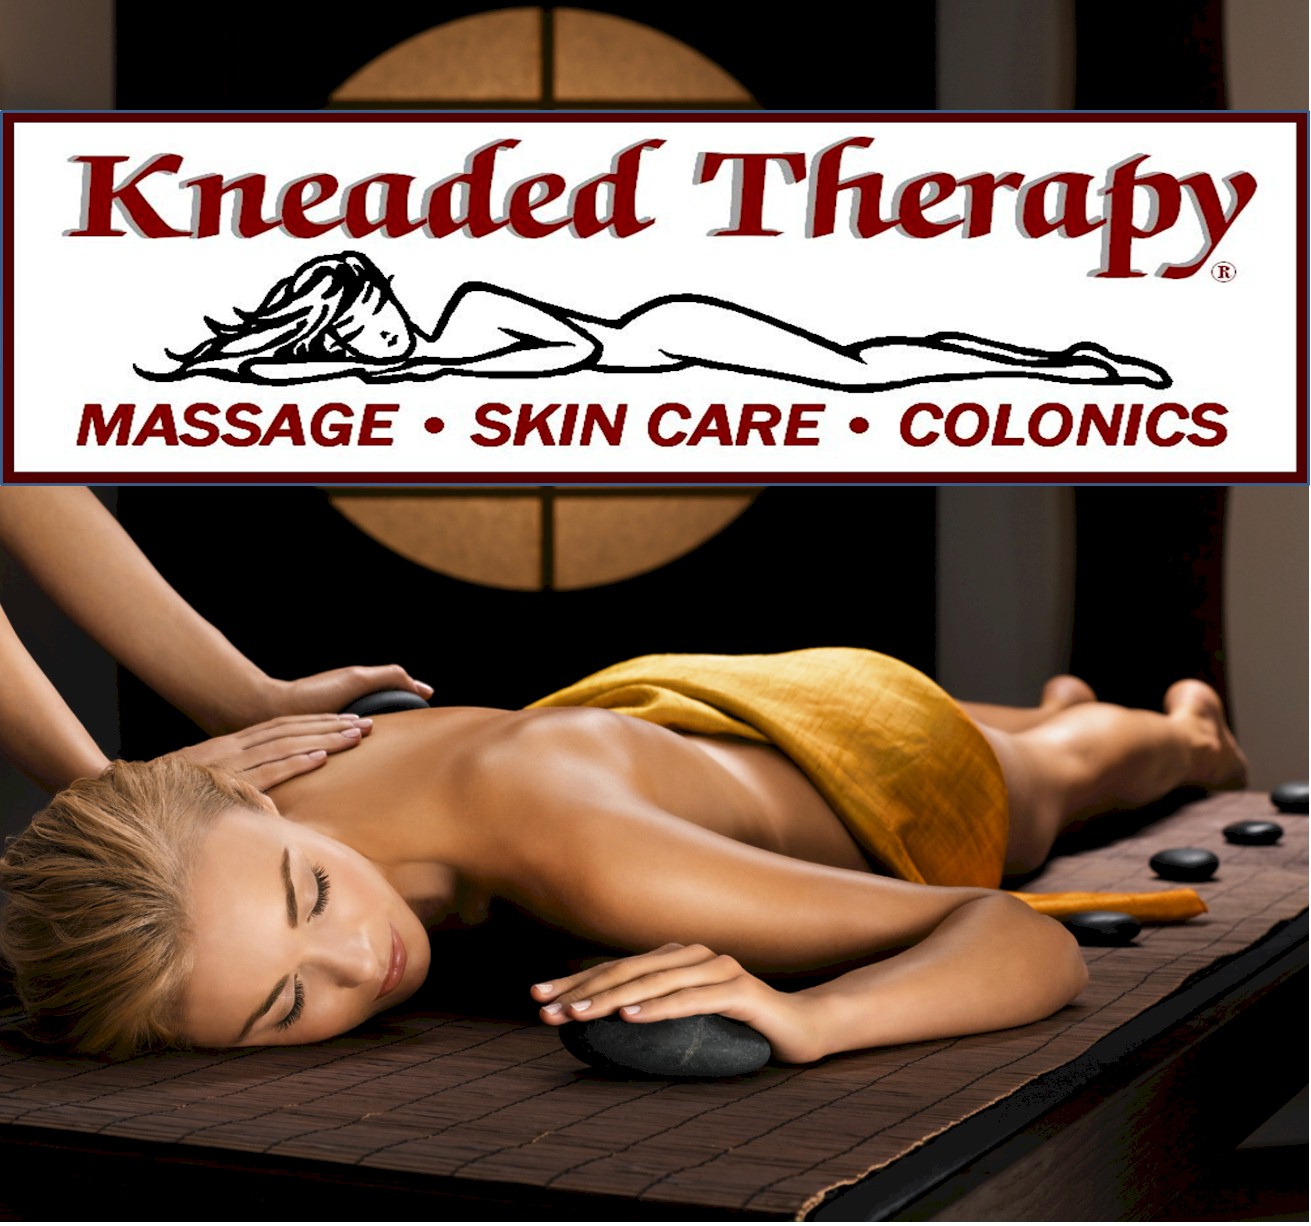 Kneaded Therapy